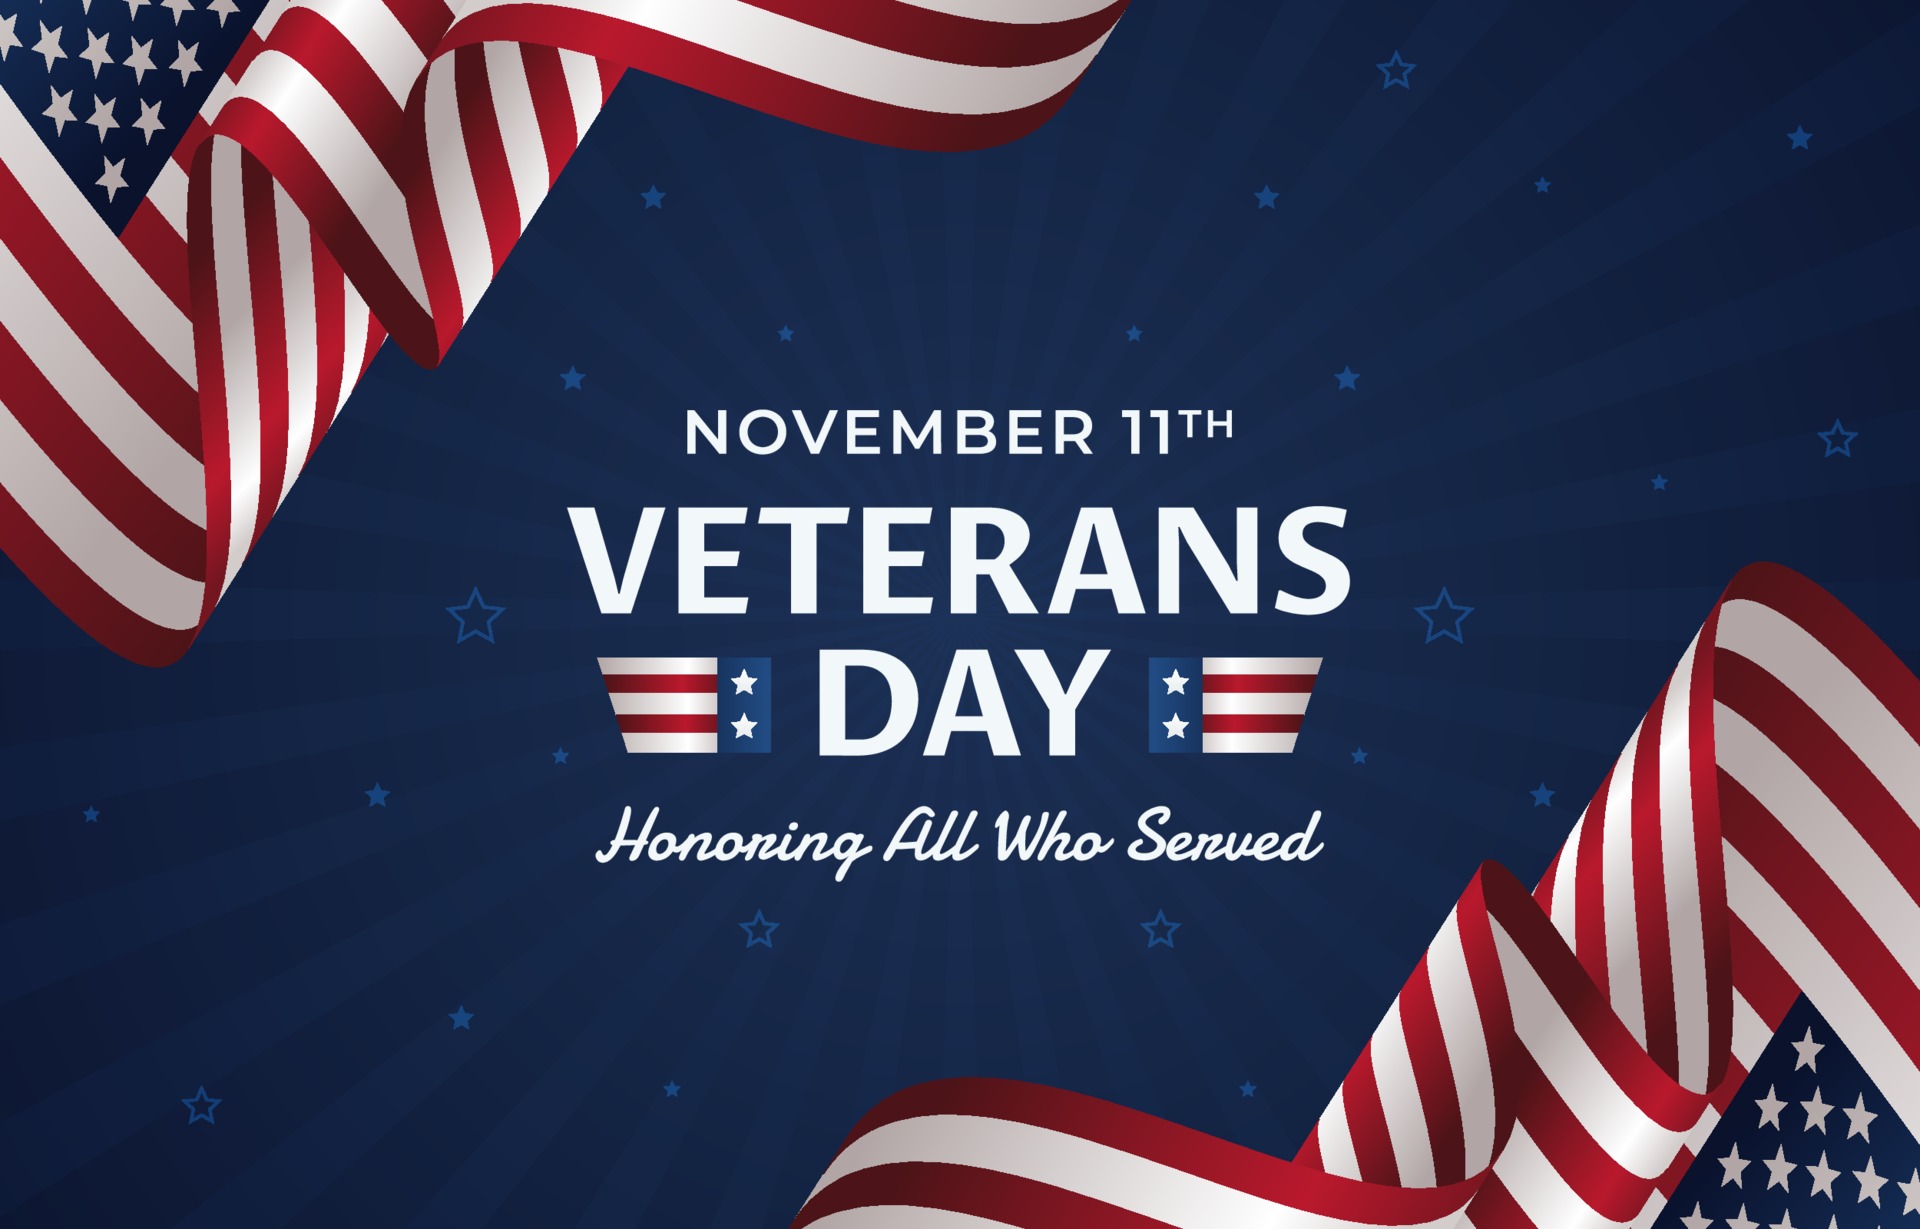 Veterans Day Background Images HD Pictures and Wallpaper For Free Download   Pngtree